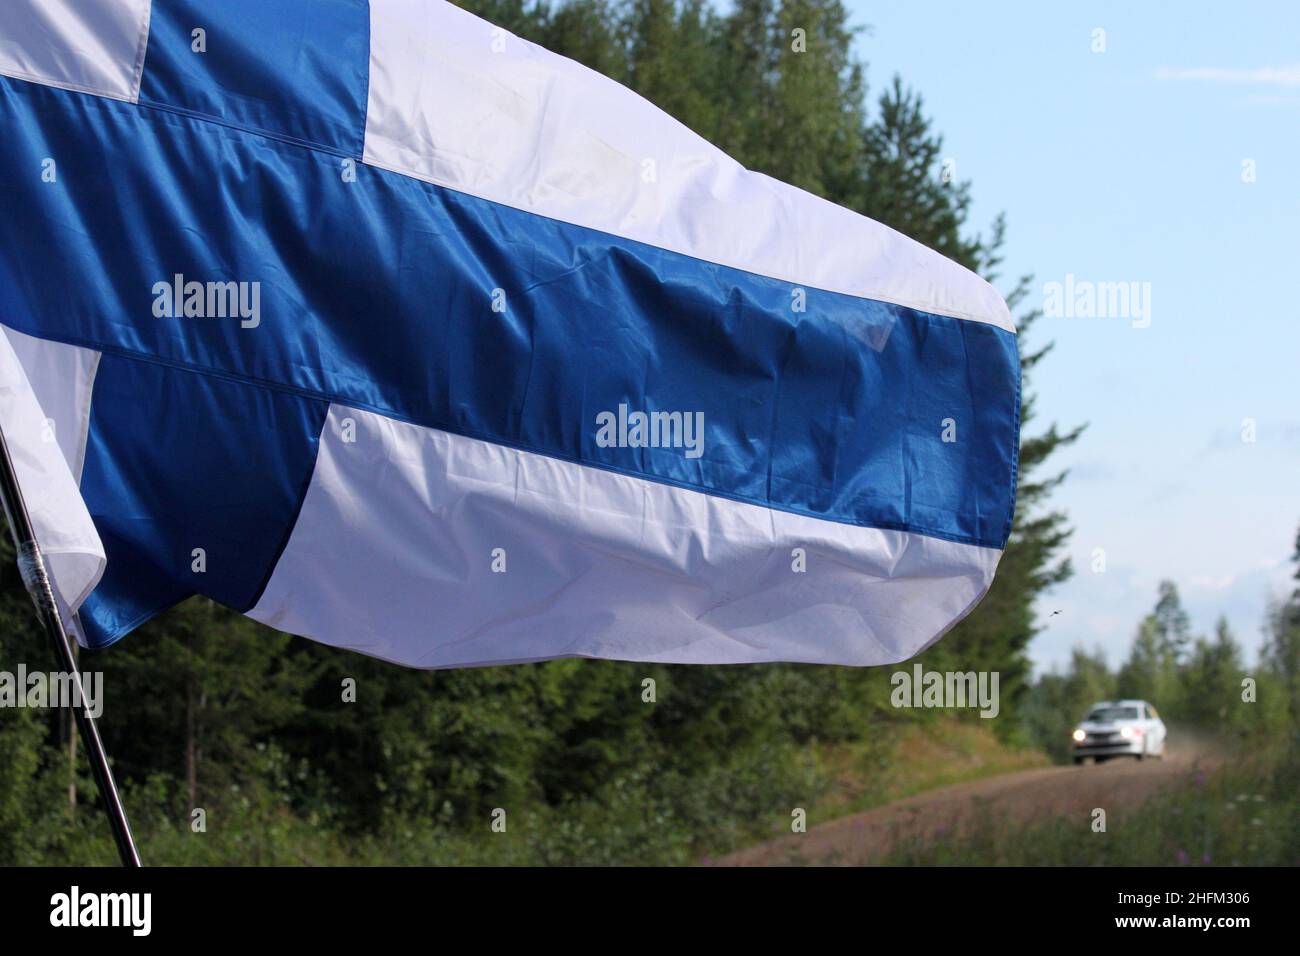 The detail of the Finnish flag waving in the wind taken during the Rally Finland. The racing car is in the background. Stock Photo